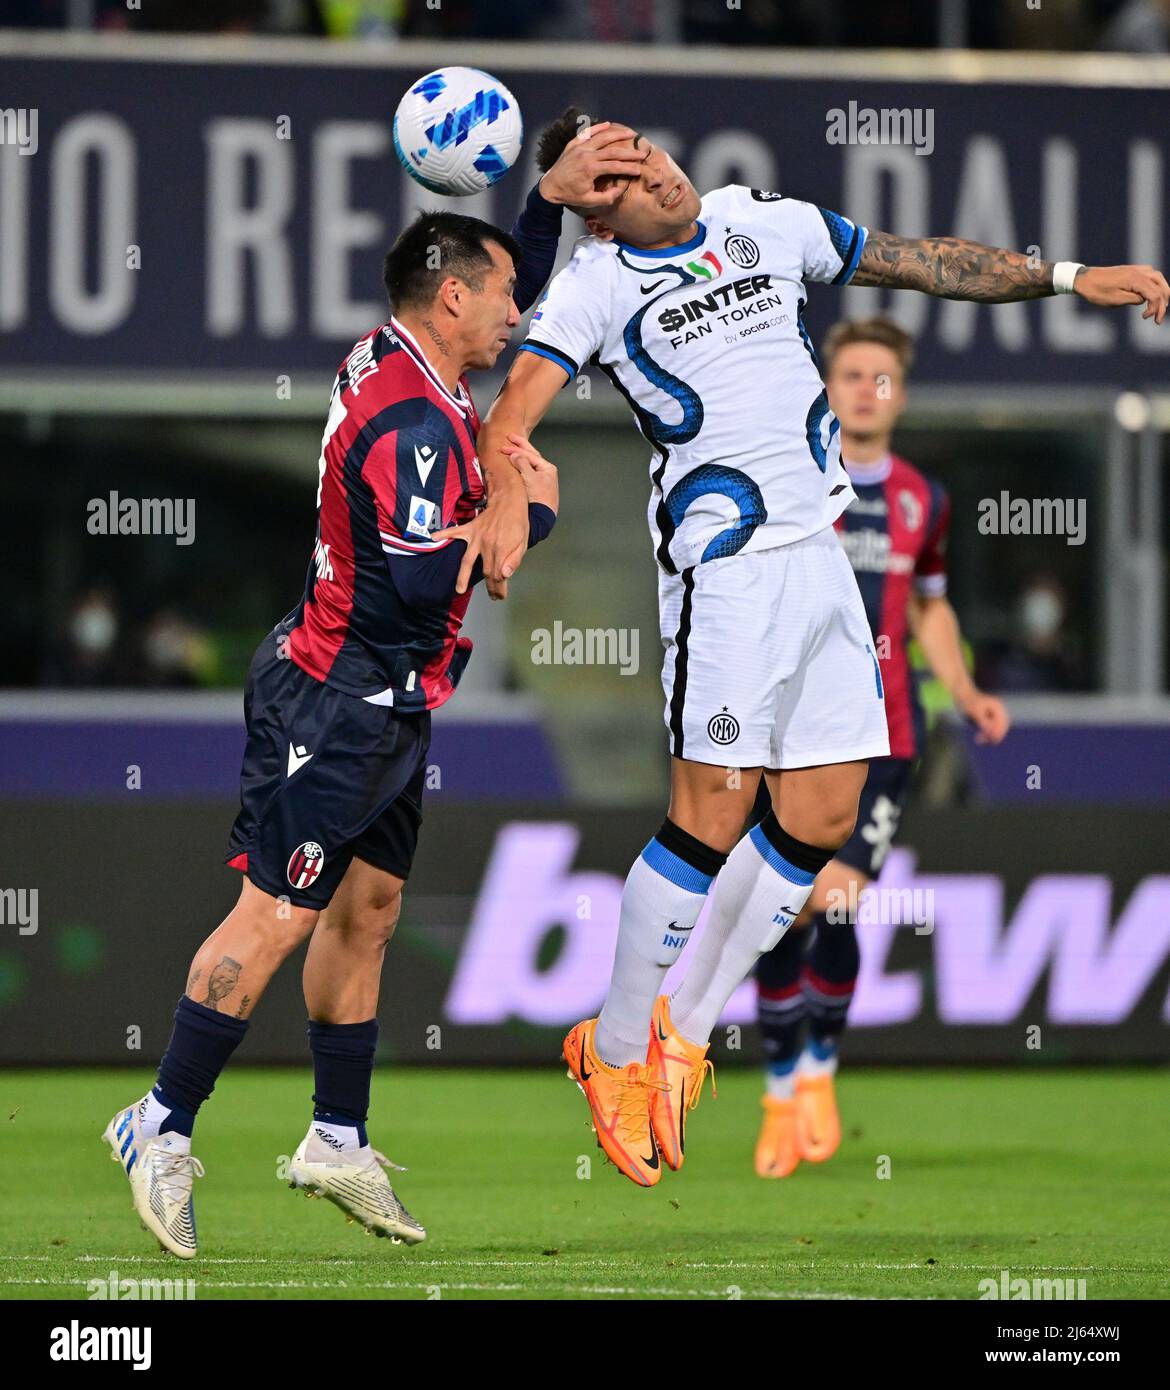 Bologna, Italy. 27th Apr, 2022. Inter Milan's Lautaro Martinez (R) vies  with Bologna's Gary Medel during their Serie A football match in Bologna,  Italy, April 27, 2022. Credit: Alberto Lingria/Xinhua/Alamy Live News